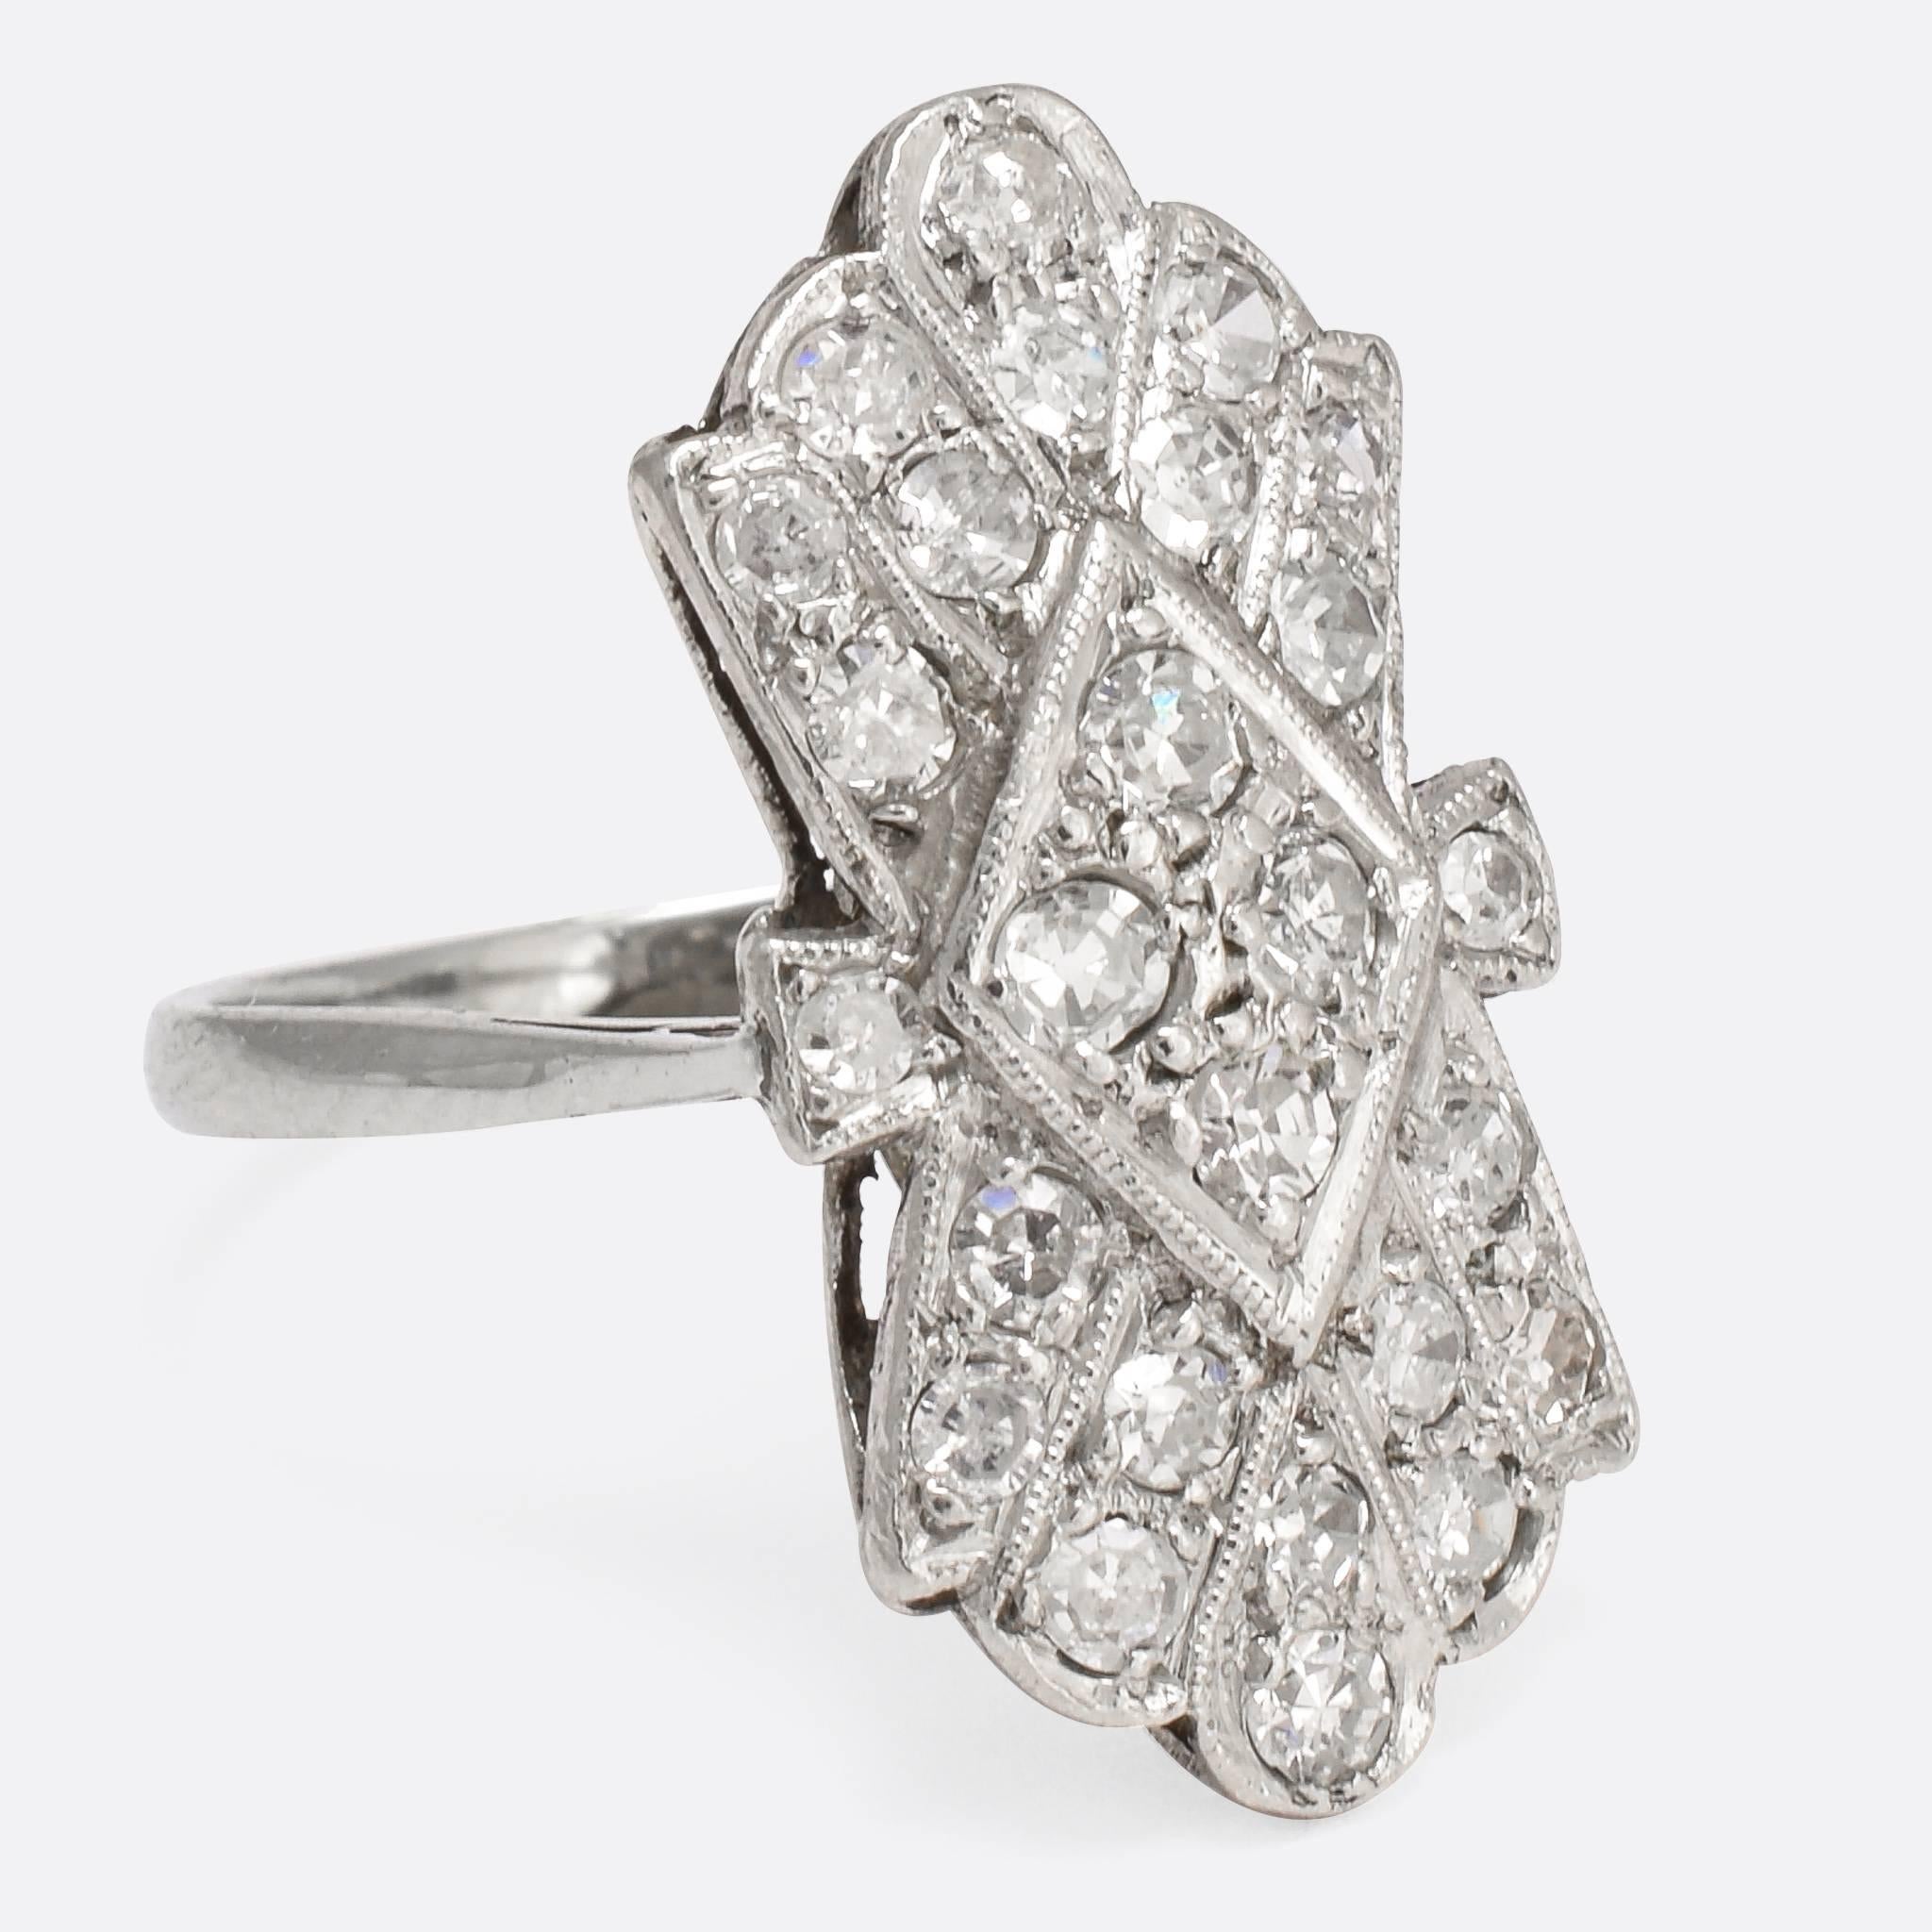 This cool Art Deco period cluster ring is modelled in 18k white gold, with platinum settings. The head is home to around .68ctw of super sparkly eight-cut diamonds that flash wildly in the light, and finished with fine millegrain detail. The styling